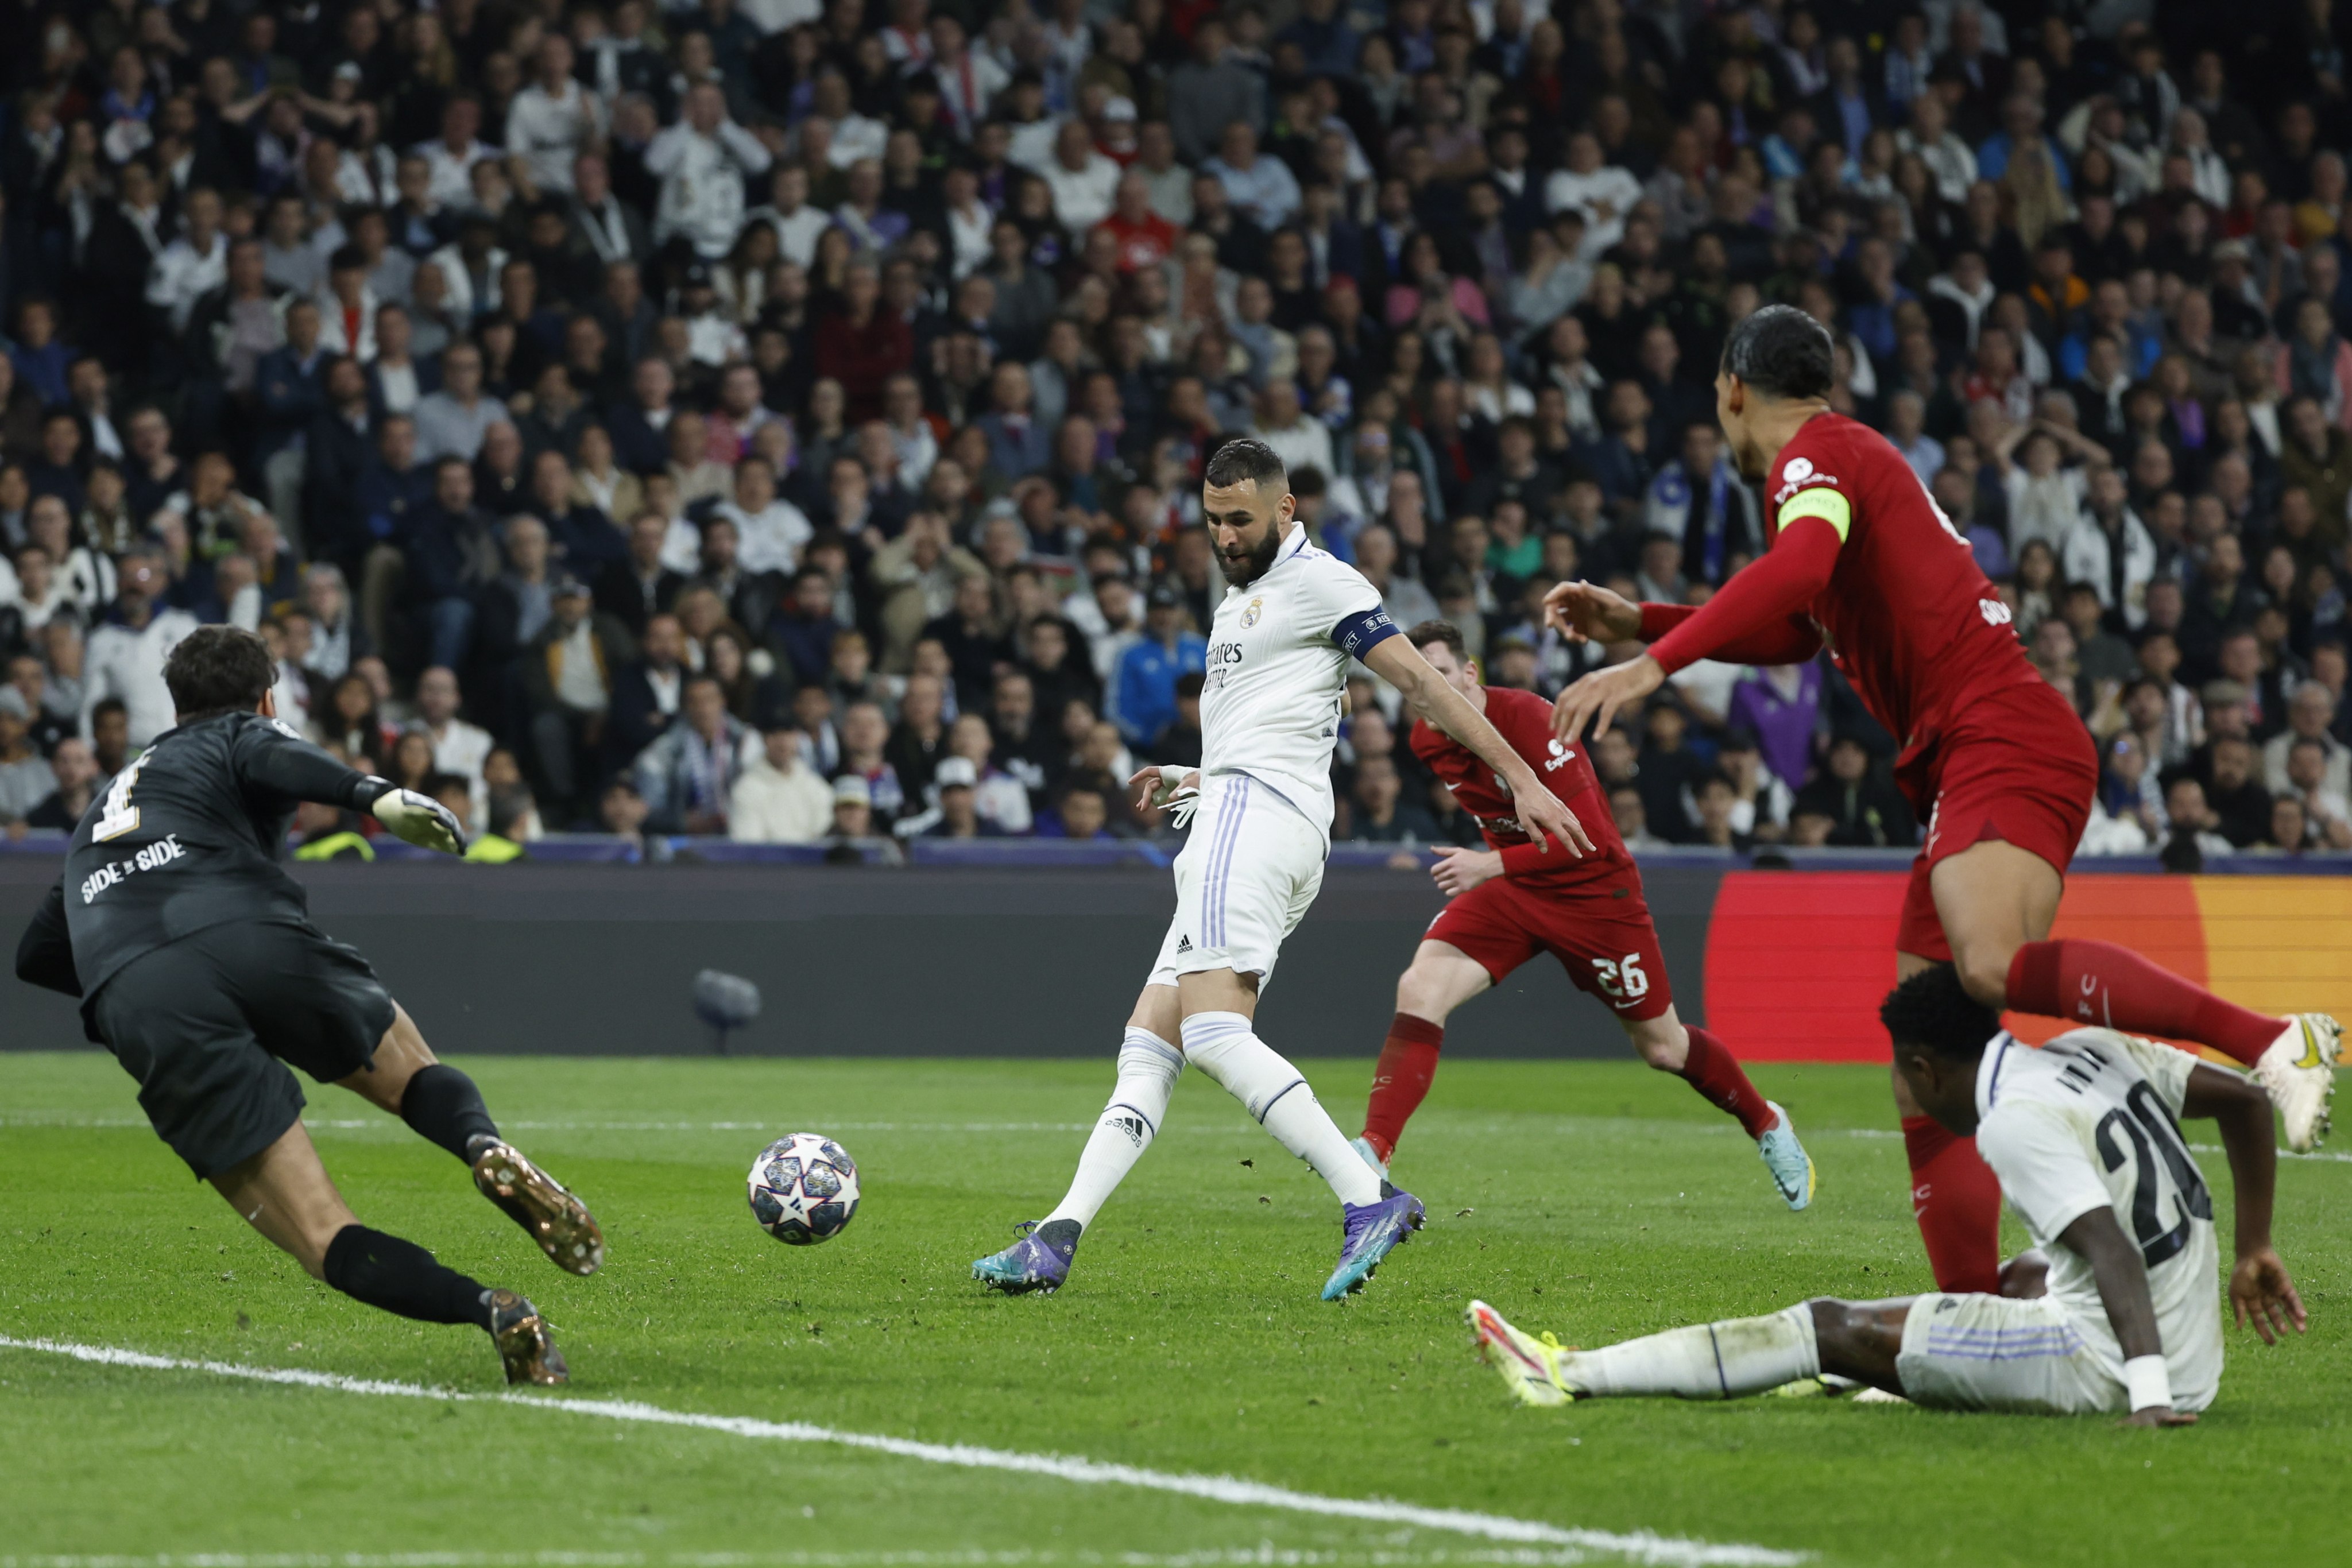 Real Madrid’s Karim Benzema scores the only goal of the night against Liverpool. Photo: EPA-EFE